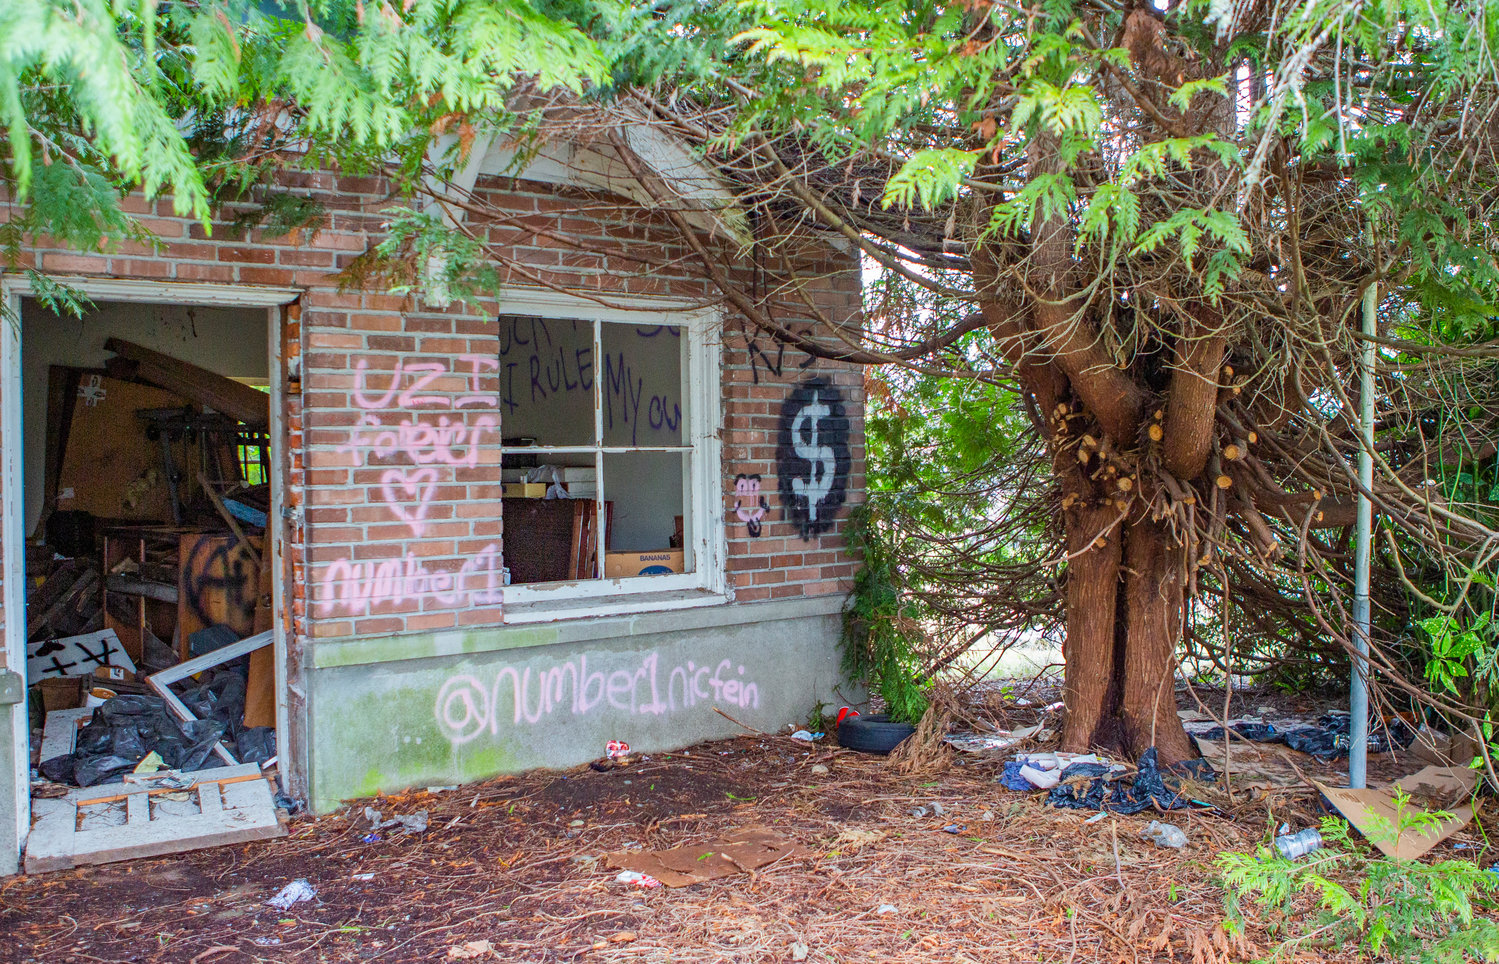 A building at Mountain View Cemetery in Centralia Wednesday overflows with trash and is covered in graffiti.